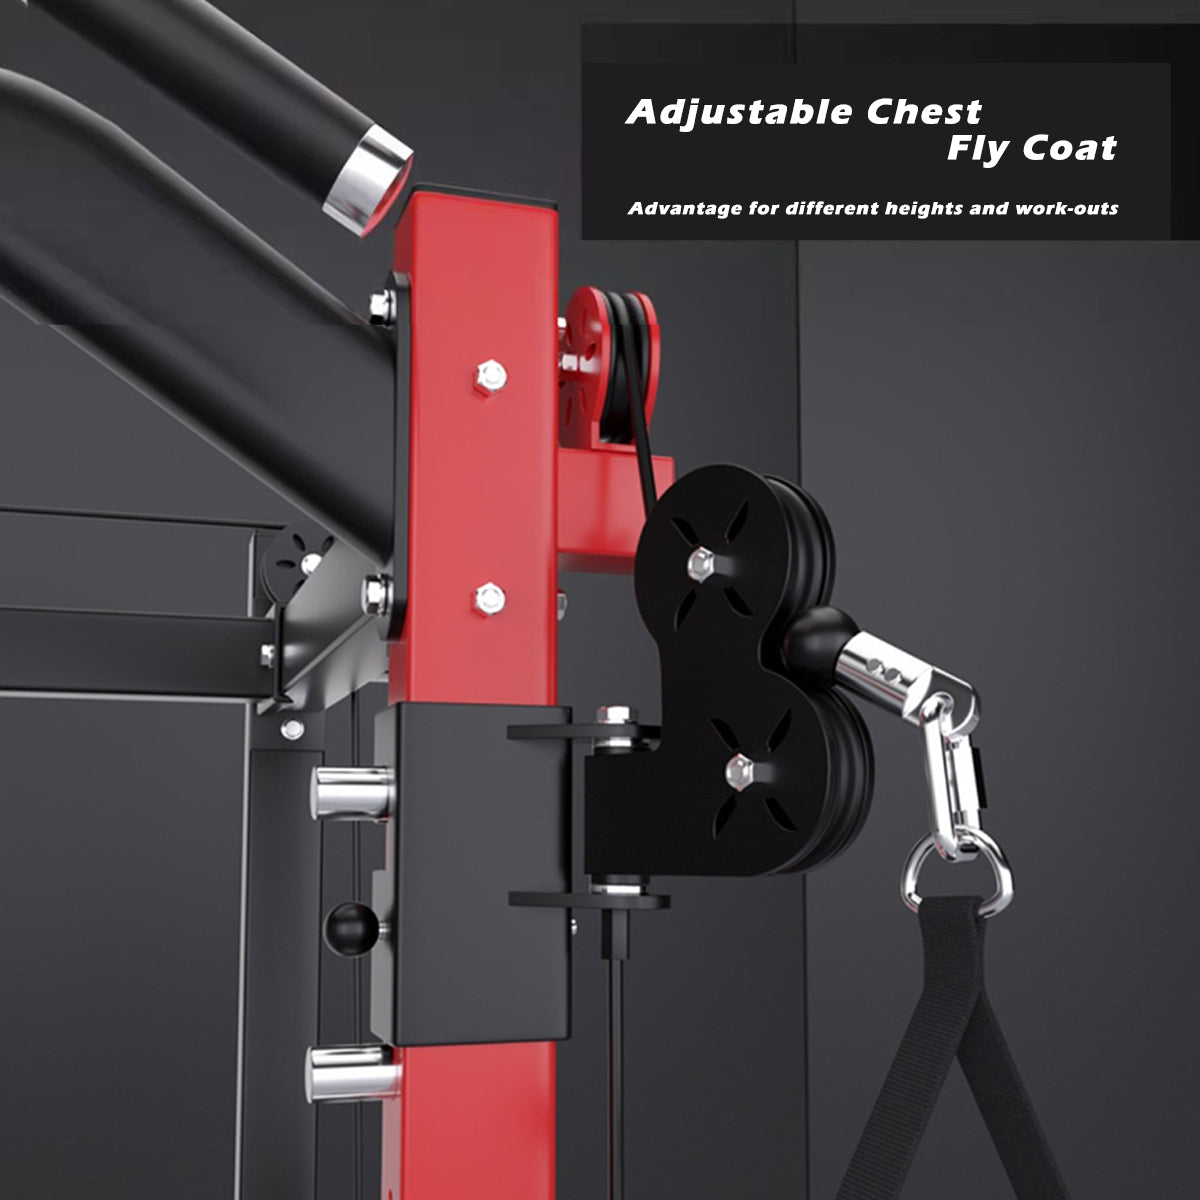 Adjustable Chest Fly Coat in Smith Machine SP024